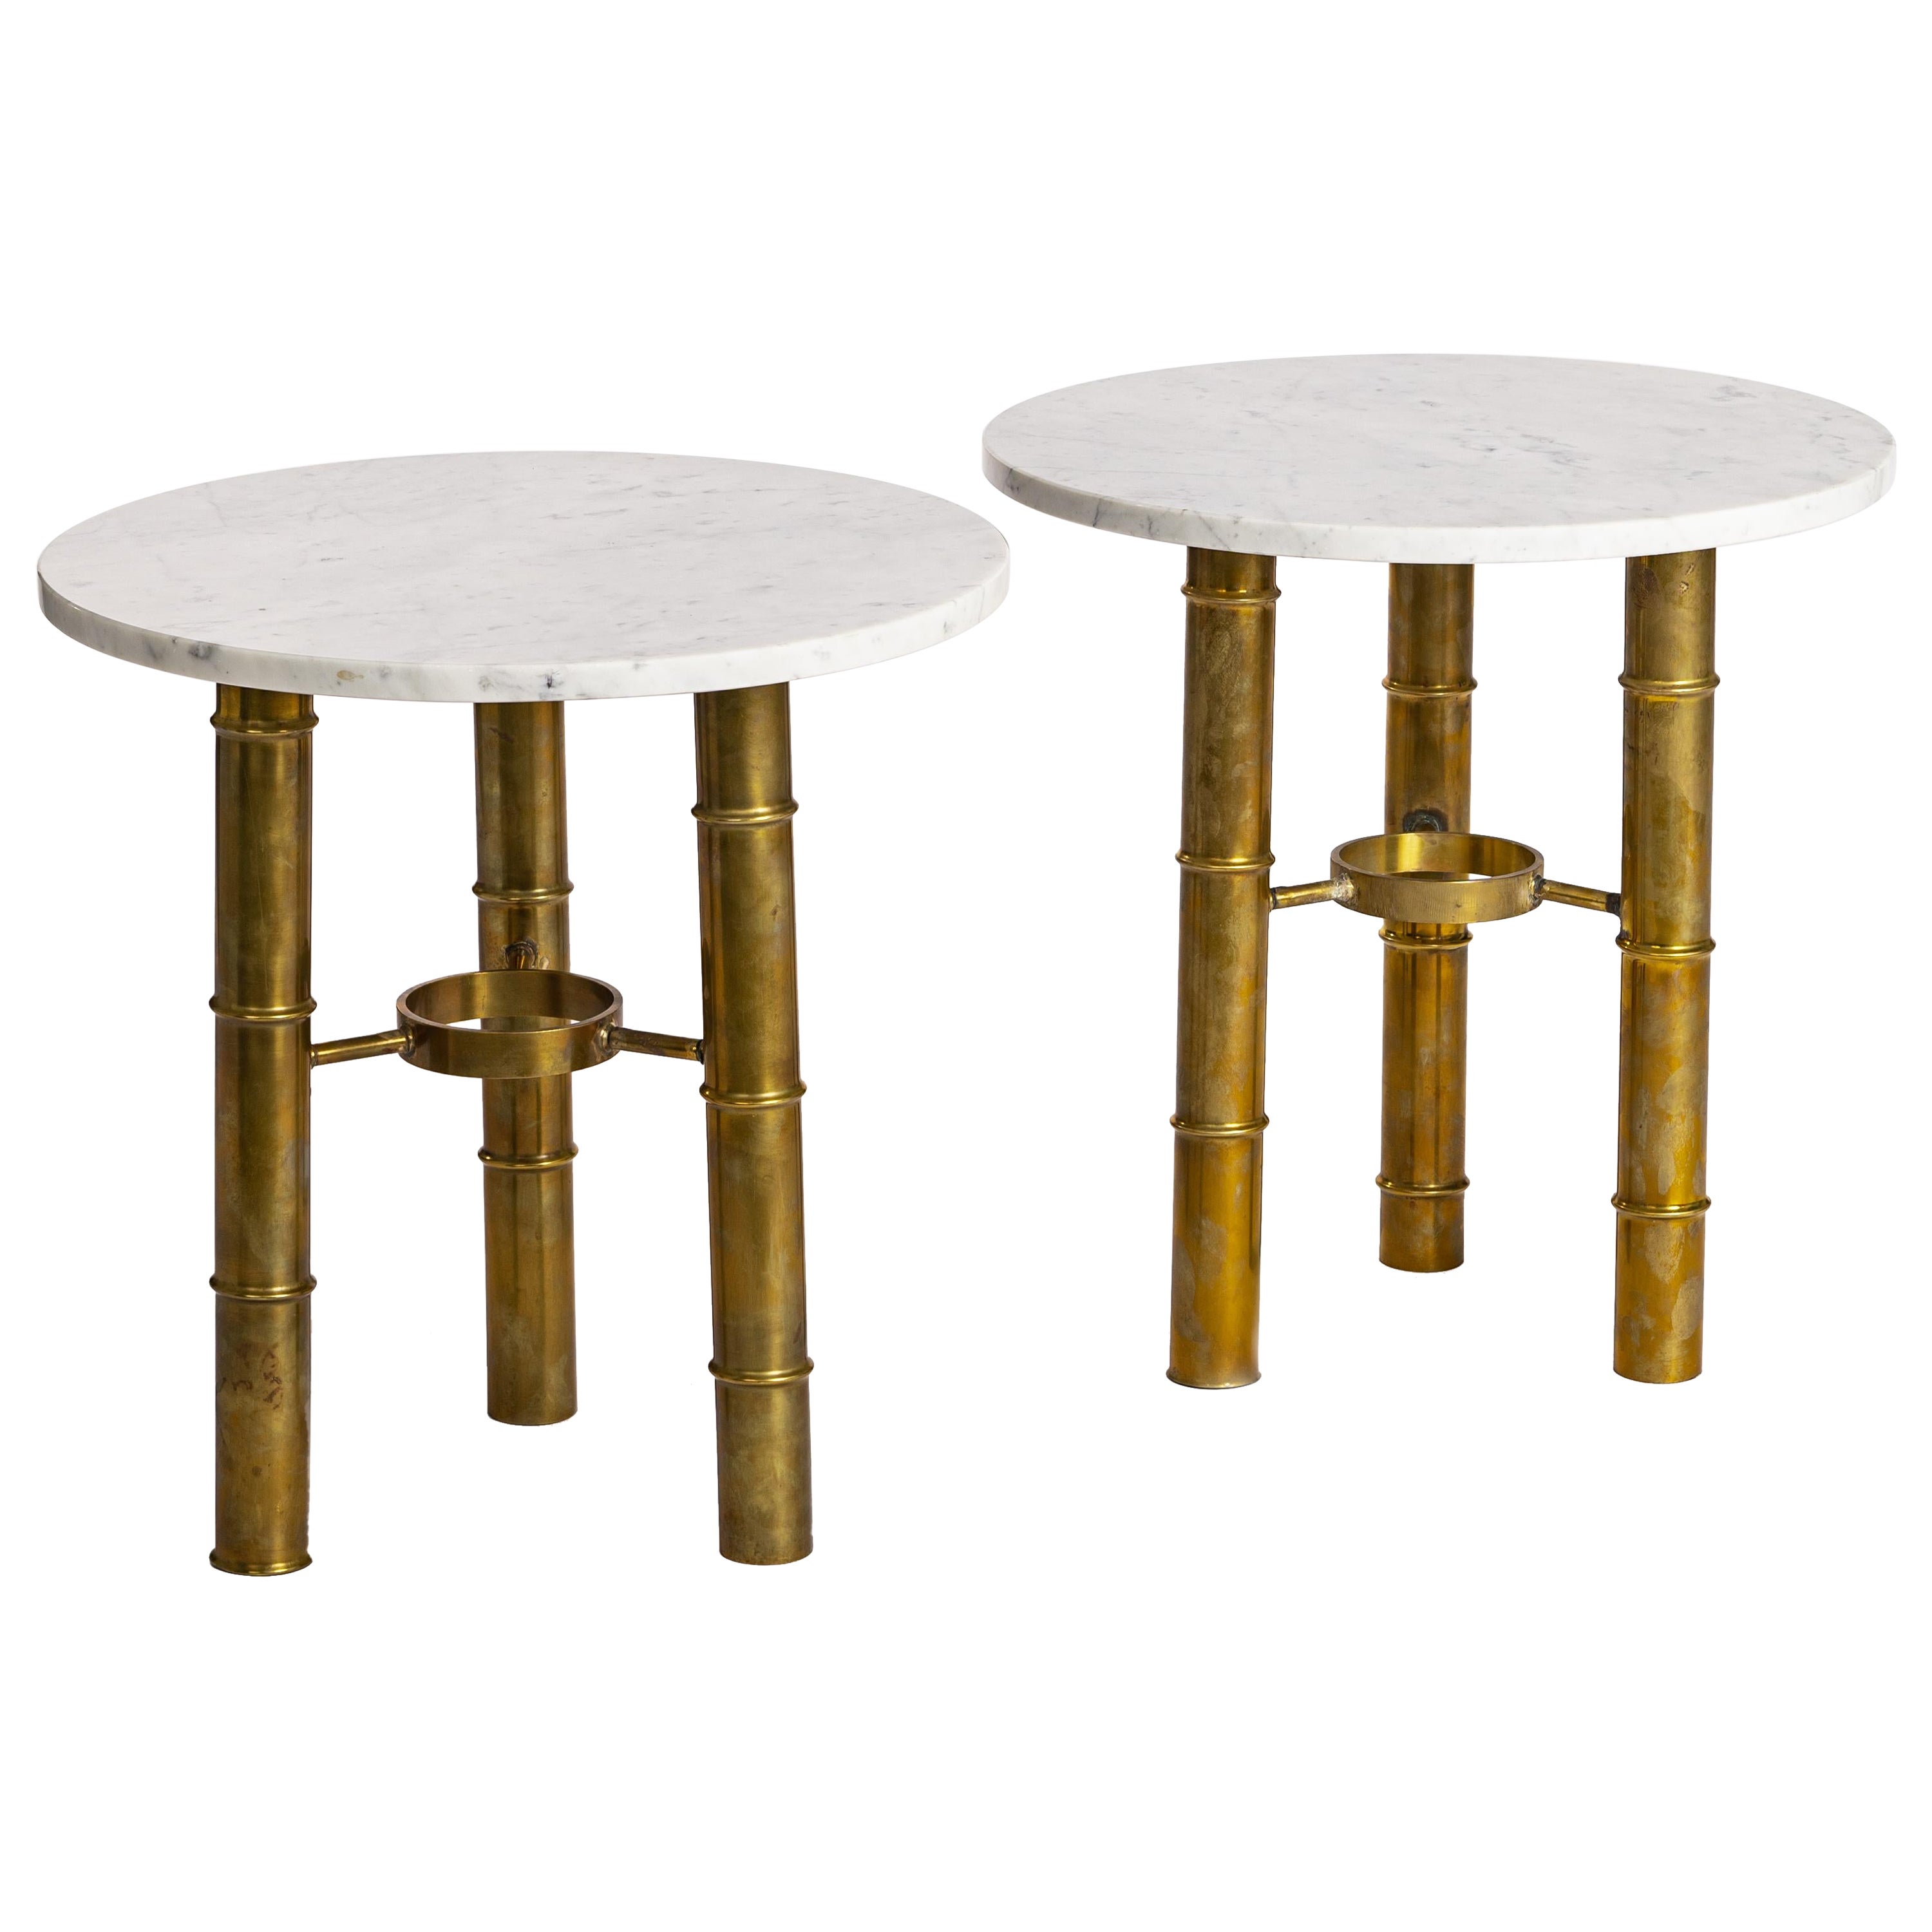 Pair of French Mid-Century Side Tables Brass Bamboo Design White Marble Top 70s